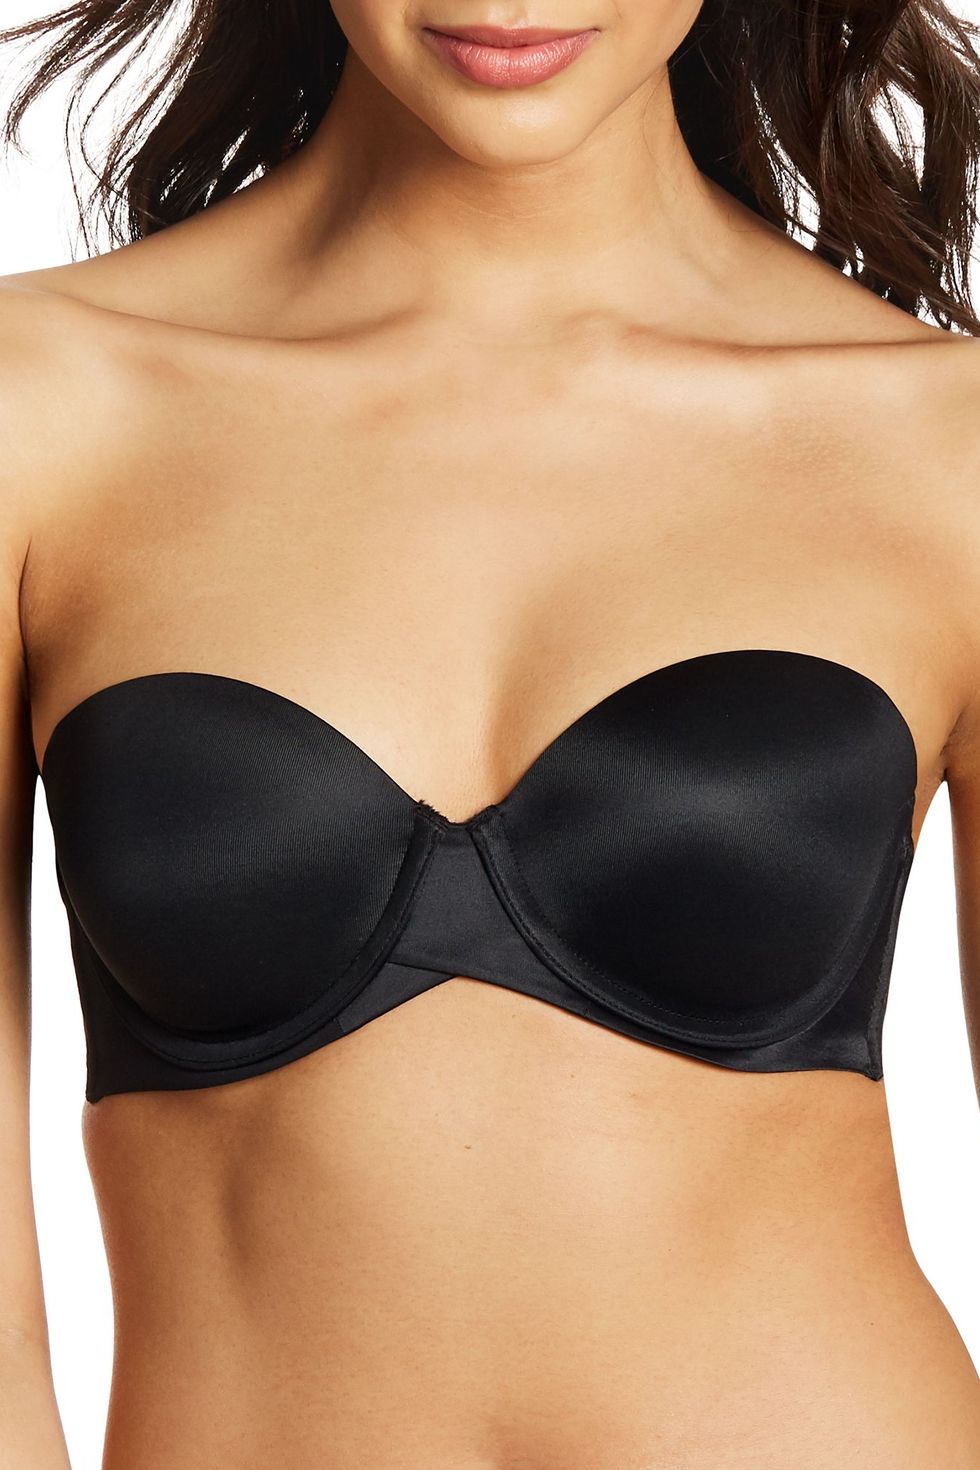 Take it from @ohsnapitschardline, the Comfort Bliss strapless is the O